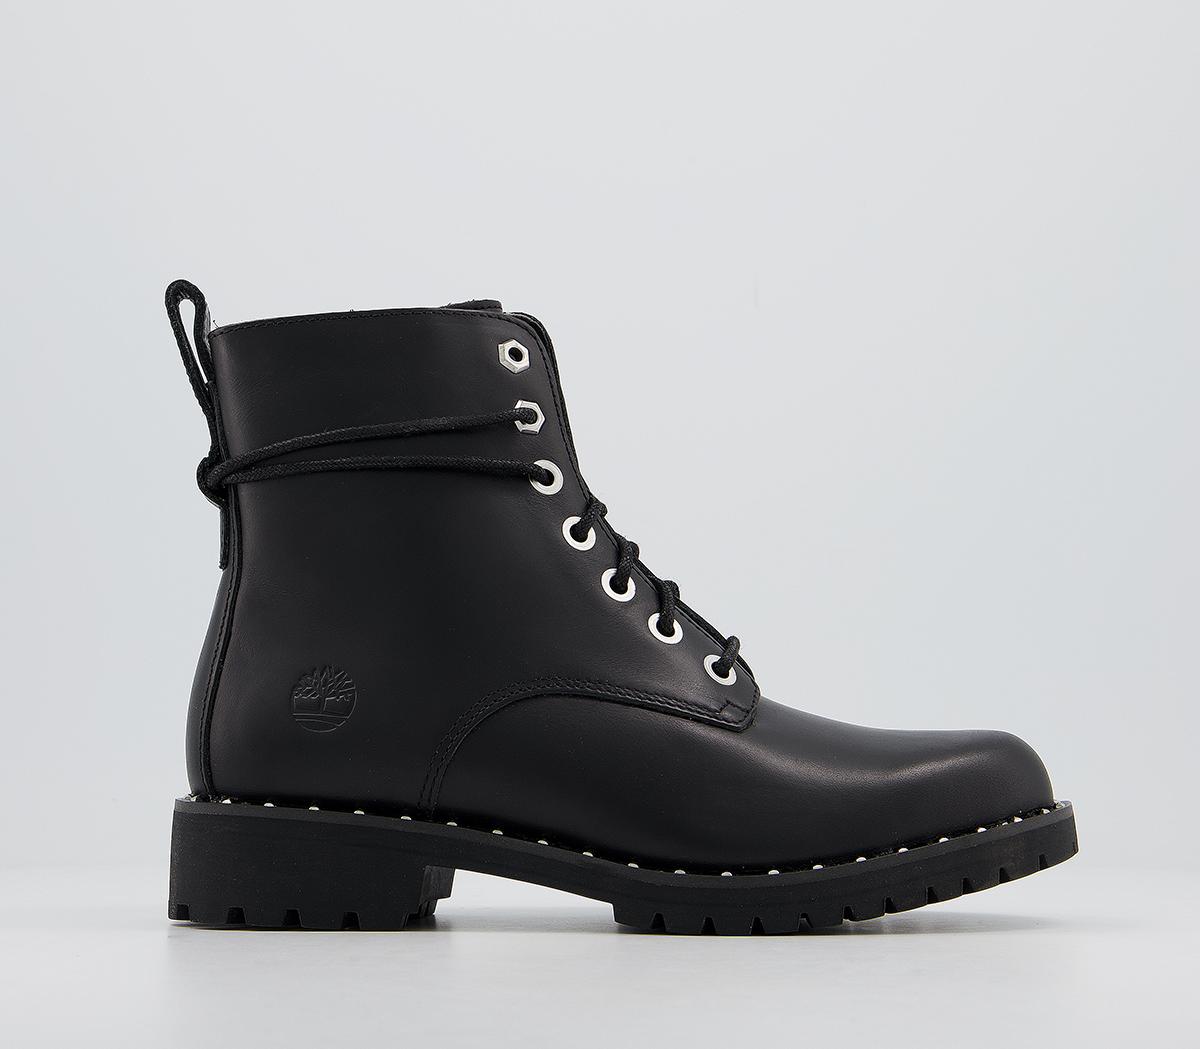 Reis rib beproeving Timberland Lux Stud Boots Black Stud - Women's Ankle Boots